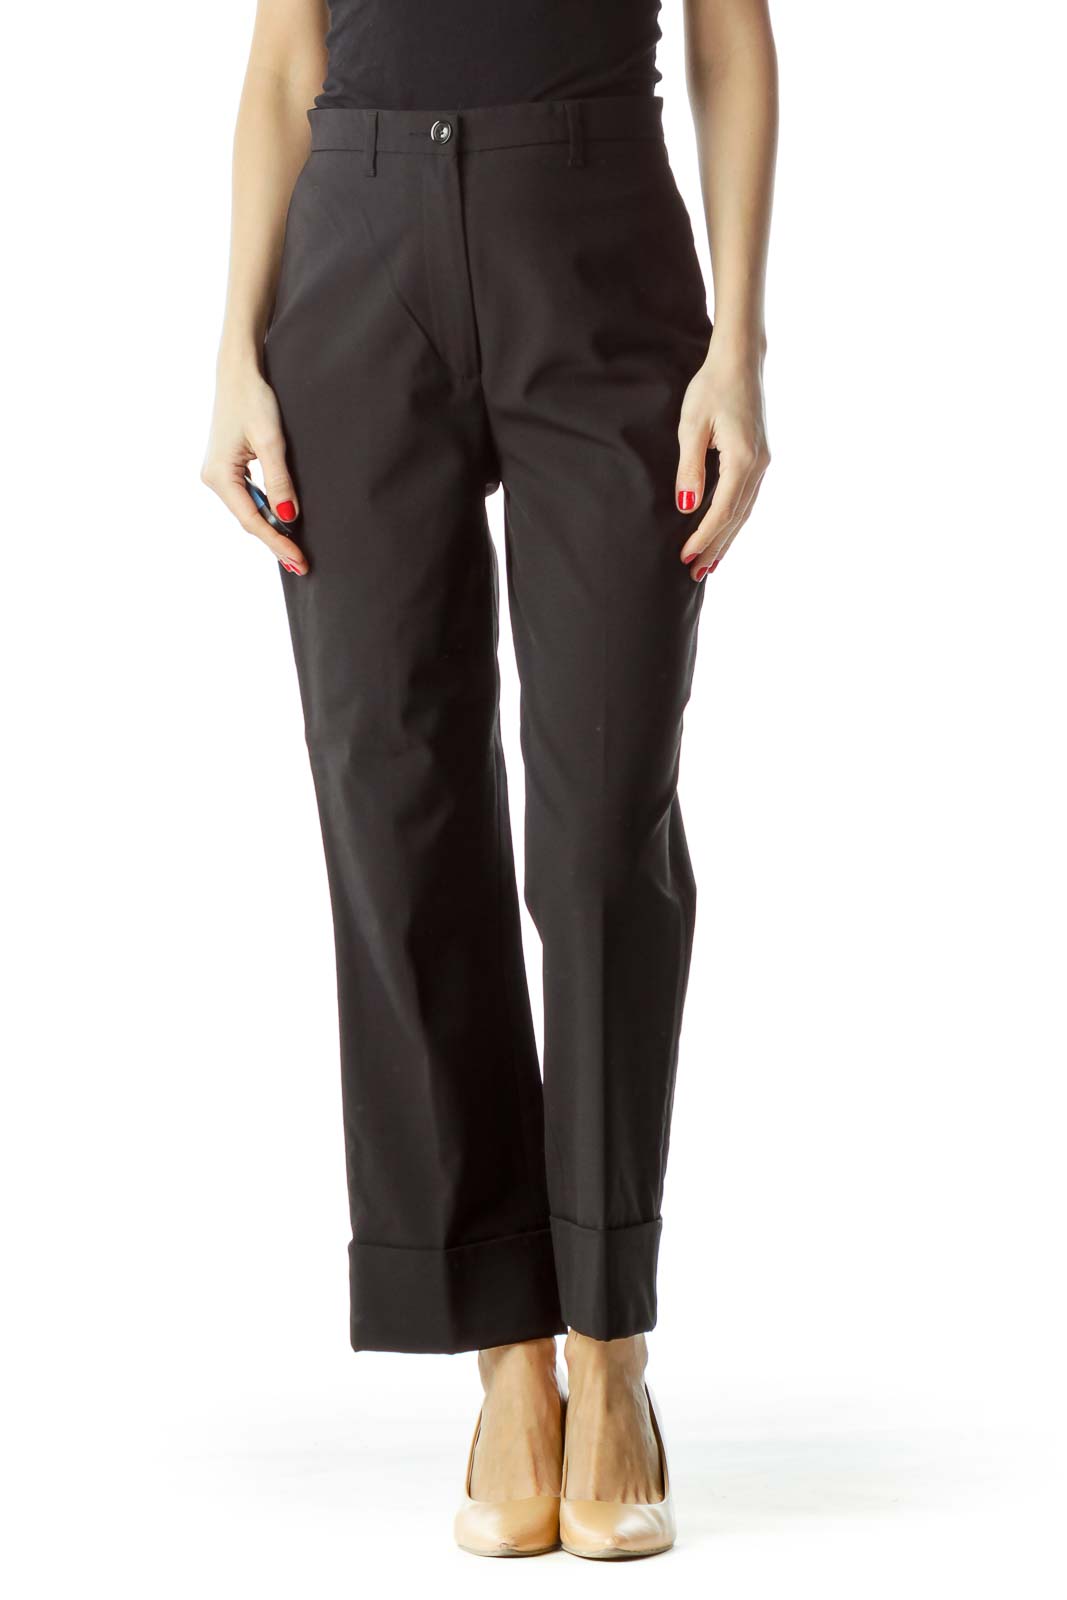 Black High-Waisted Rolled-Up Legs Pants Front